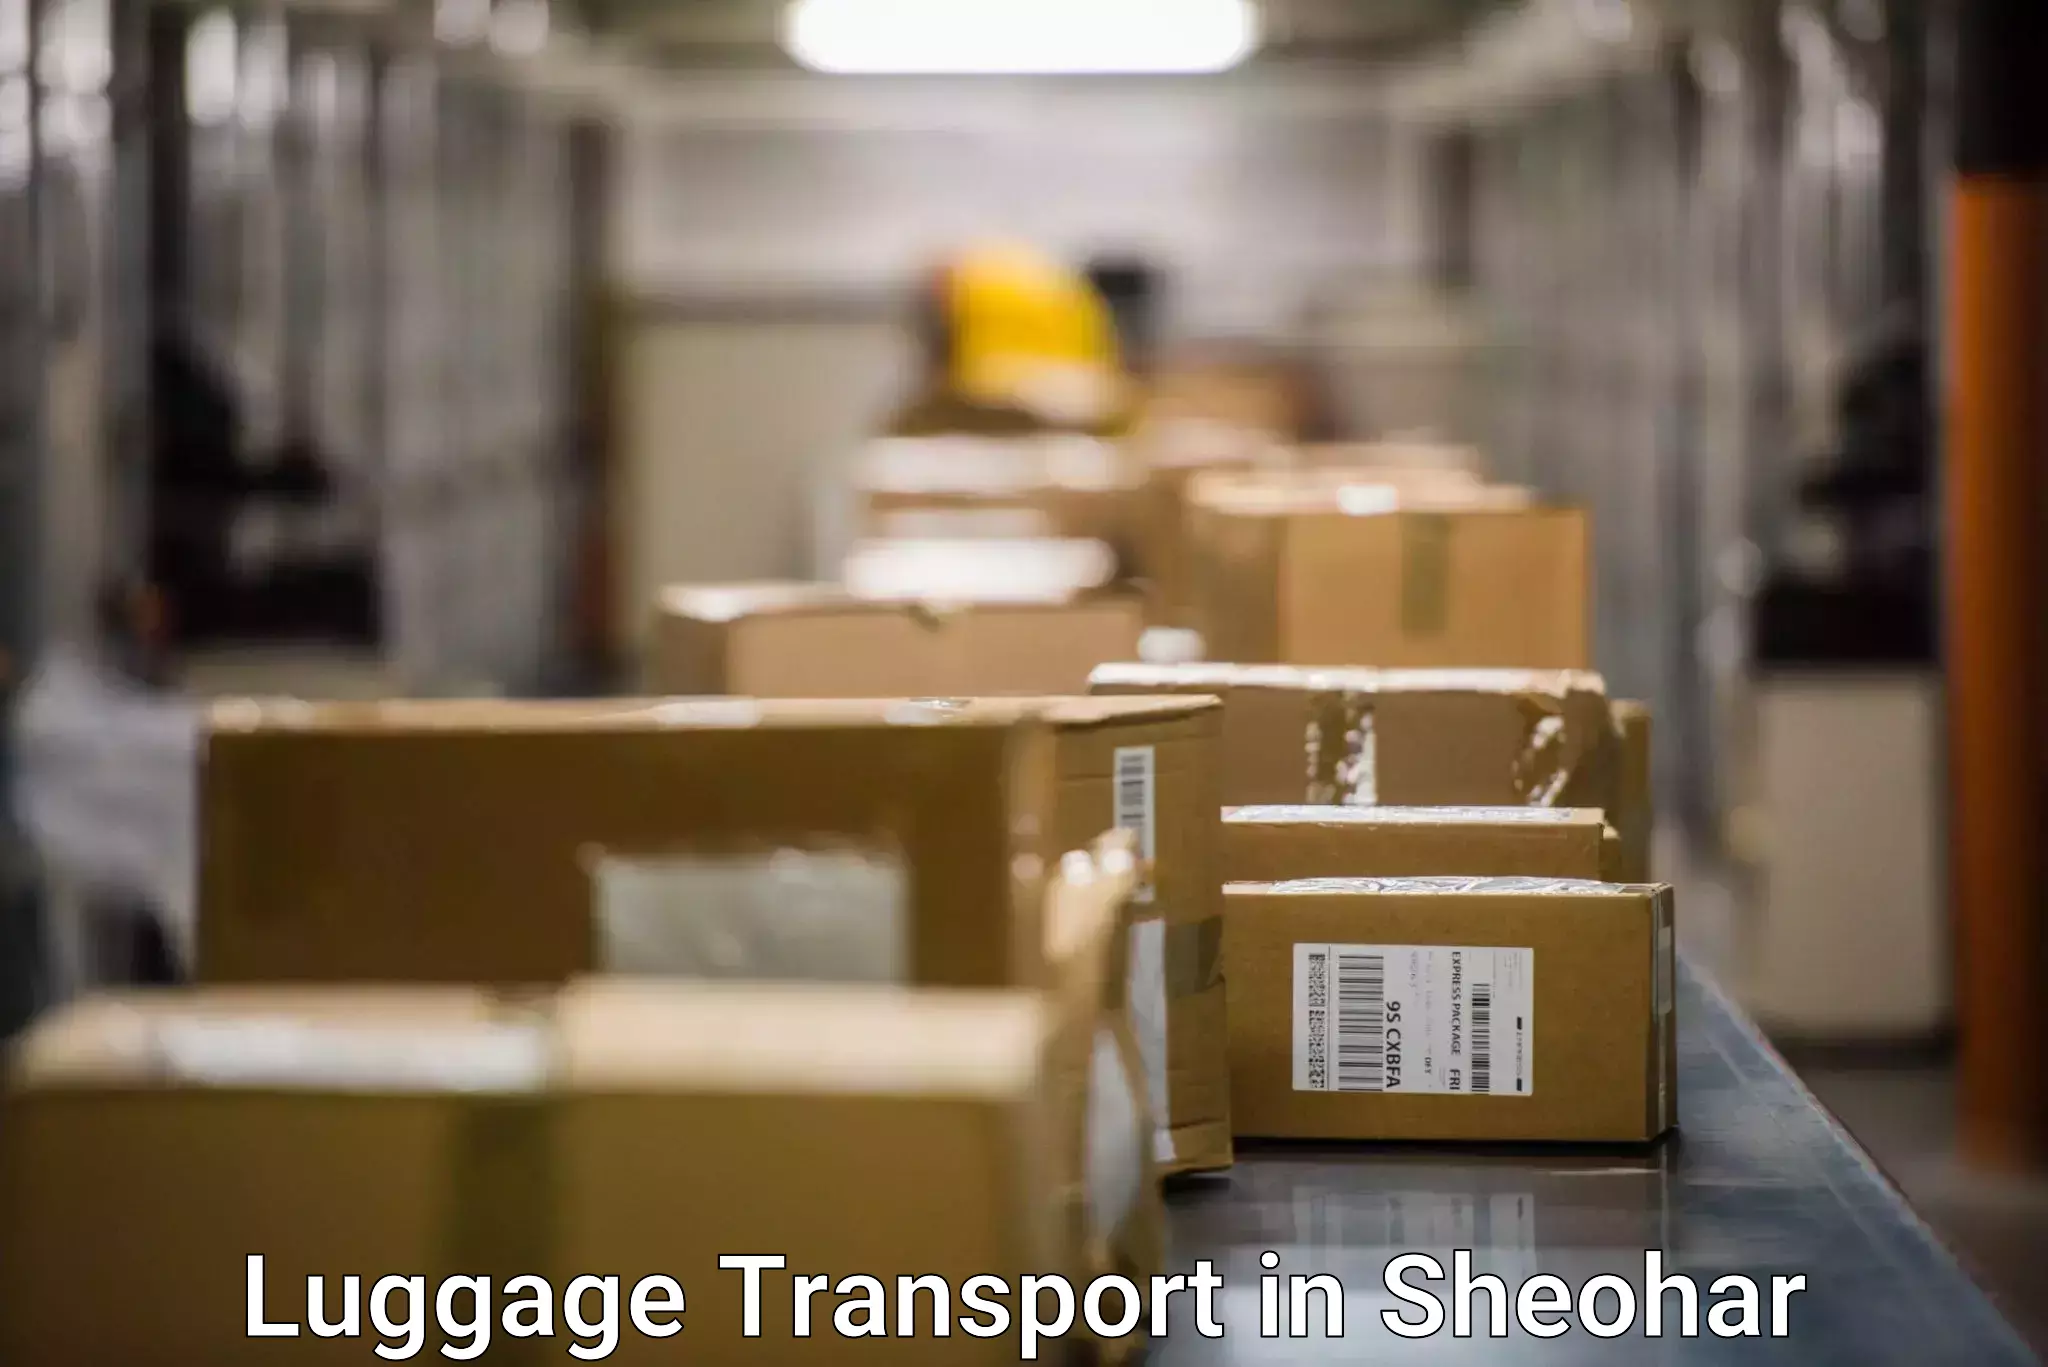 Luggage transport guidelines in Sheohar